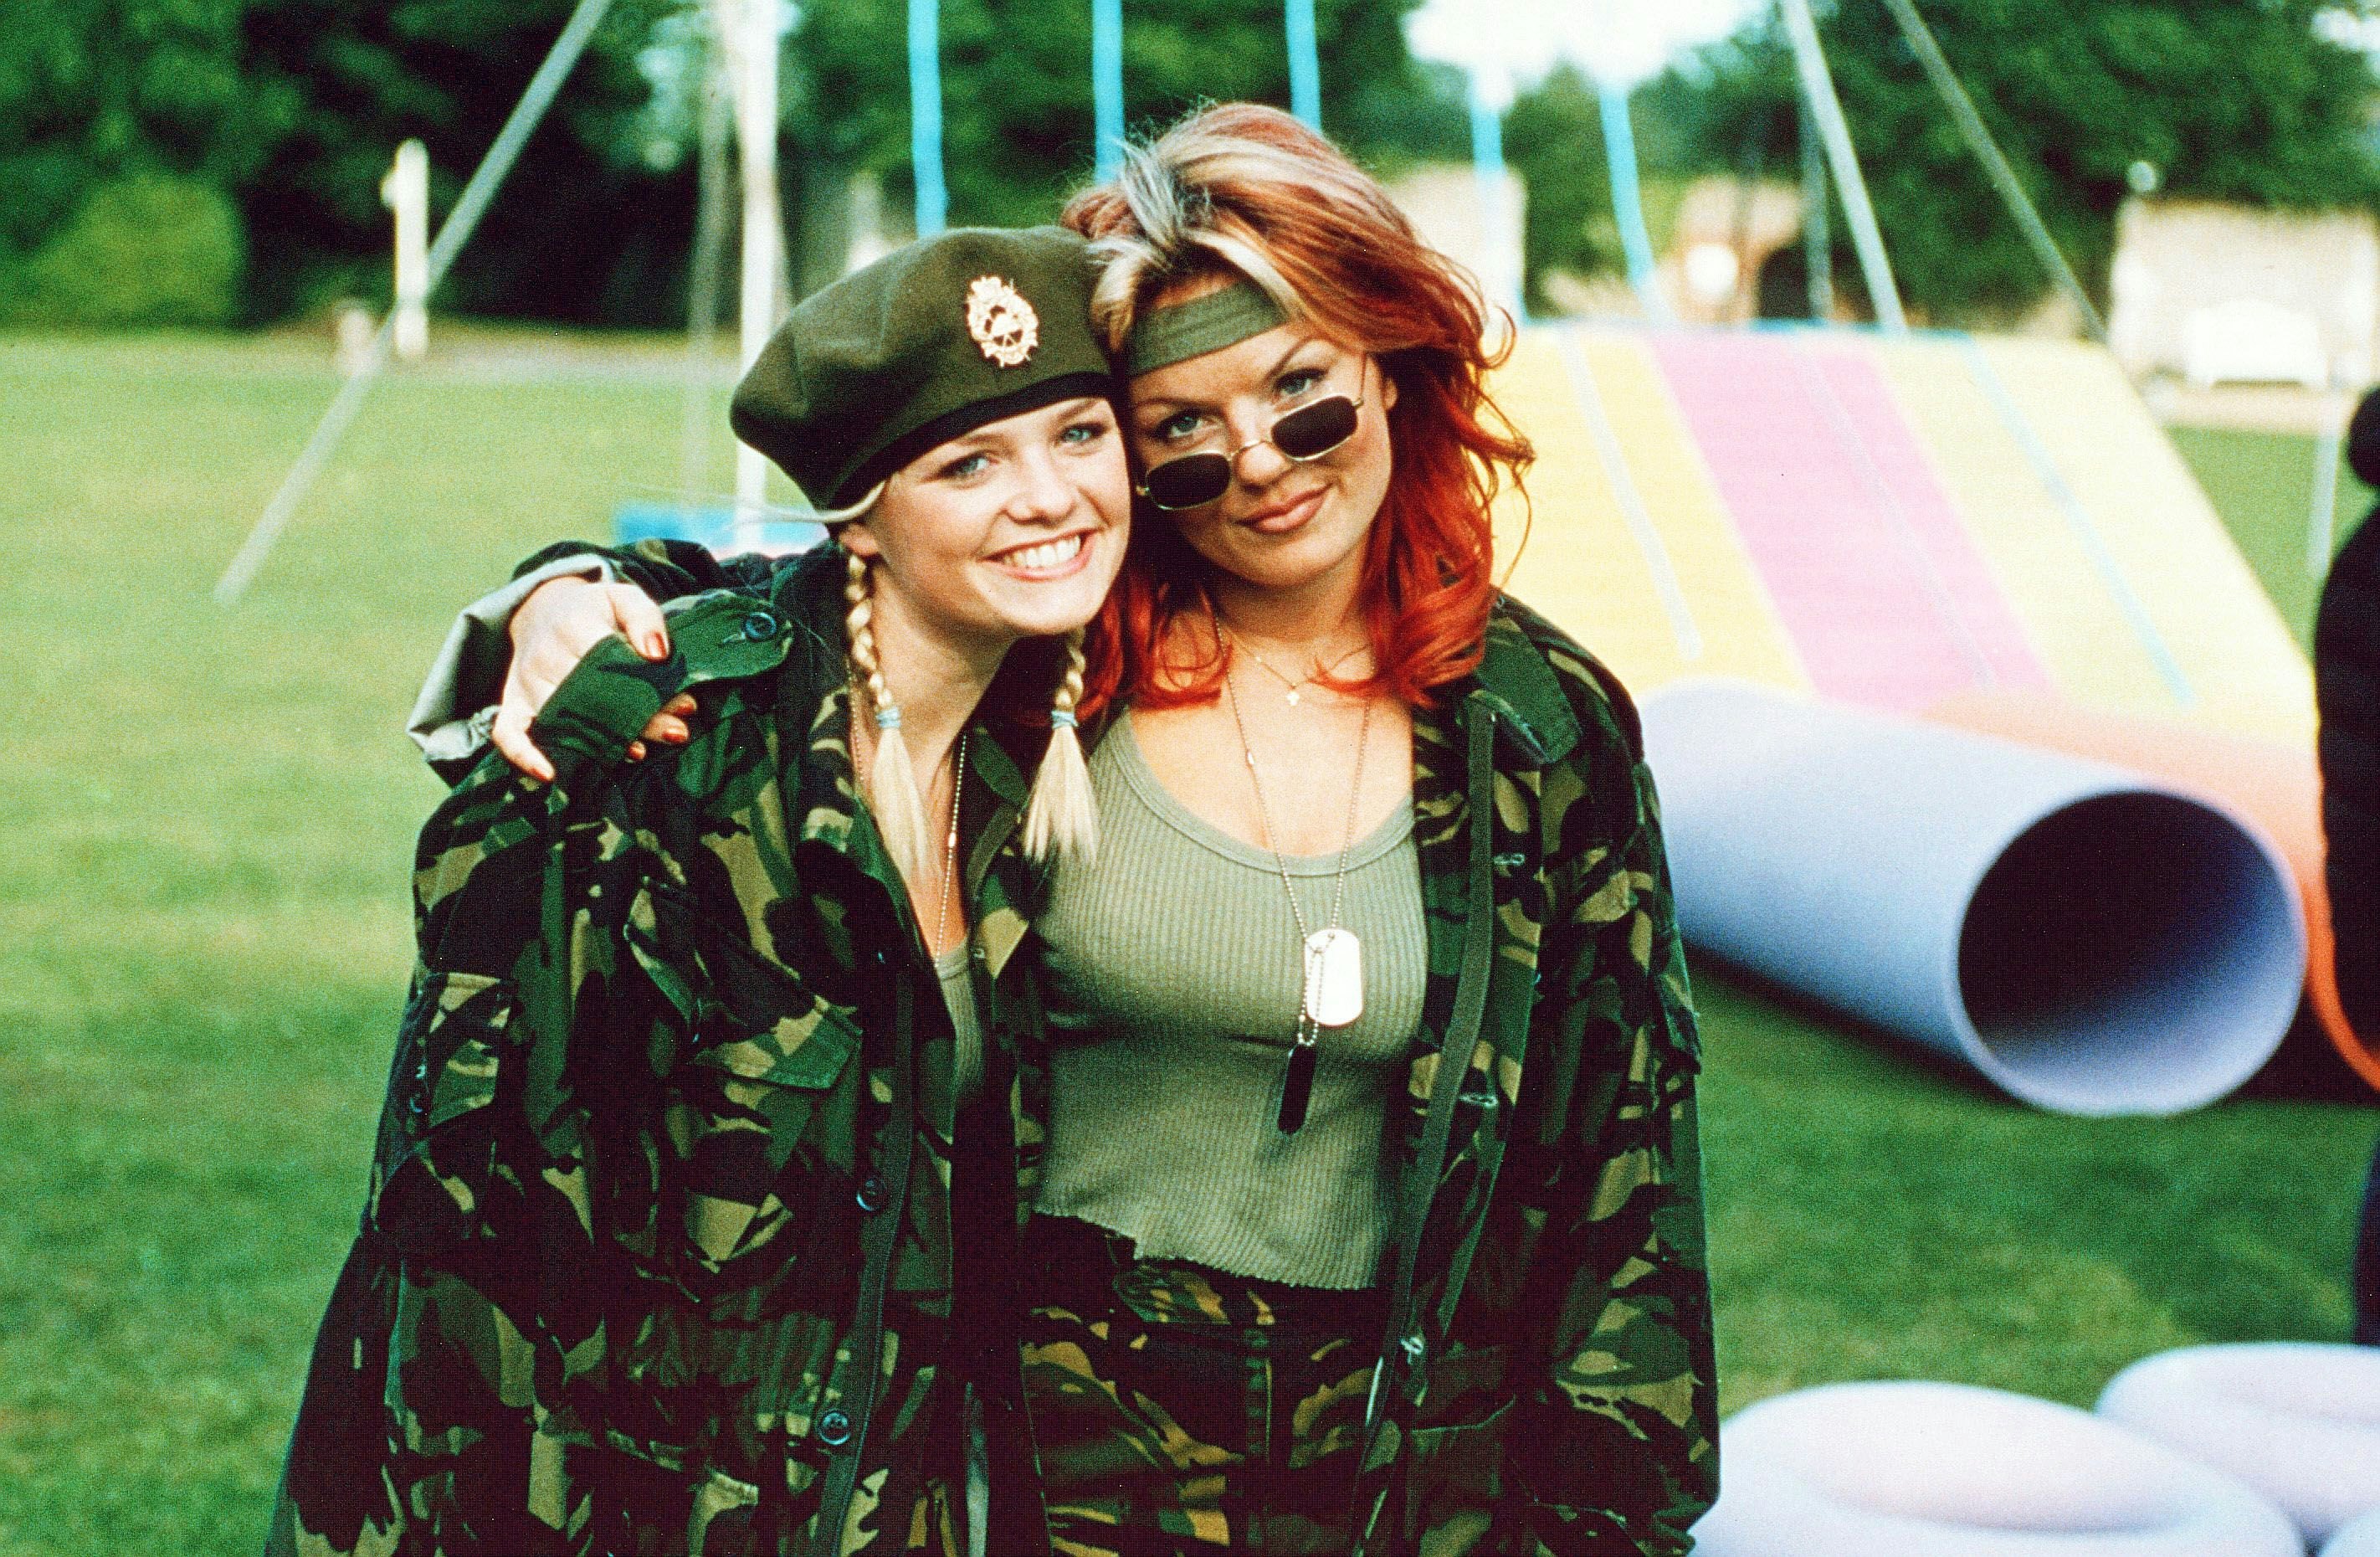 Beauty Throwback: Geri Halliwell's Iconic '90s Hair and Makeup